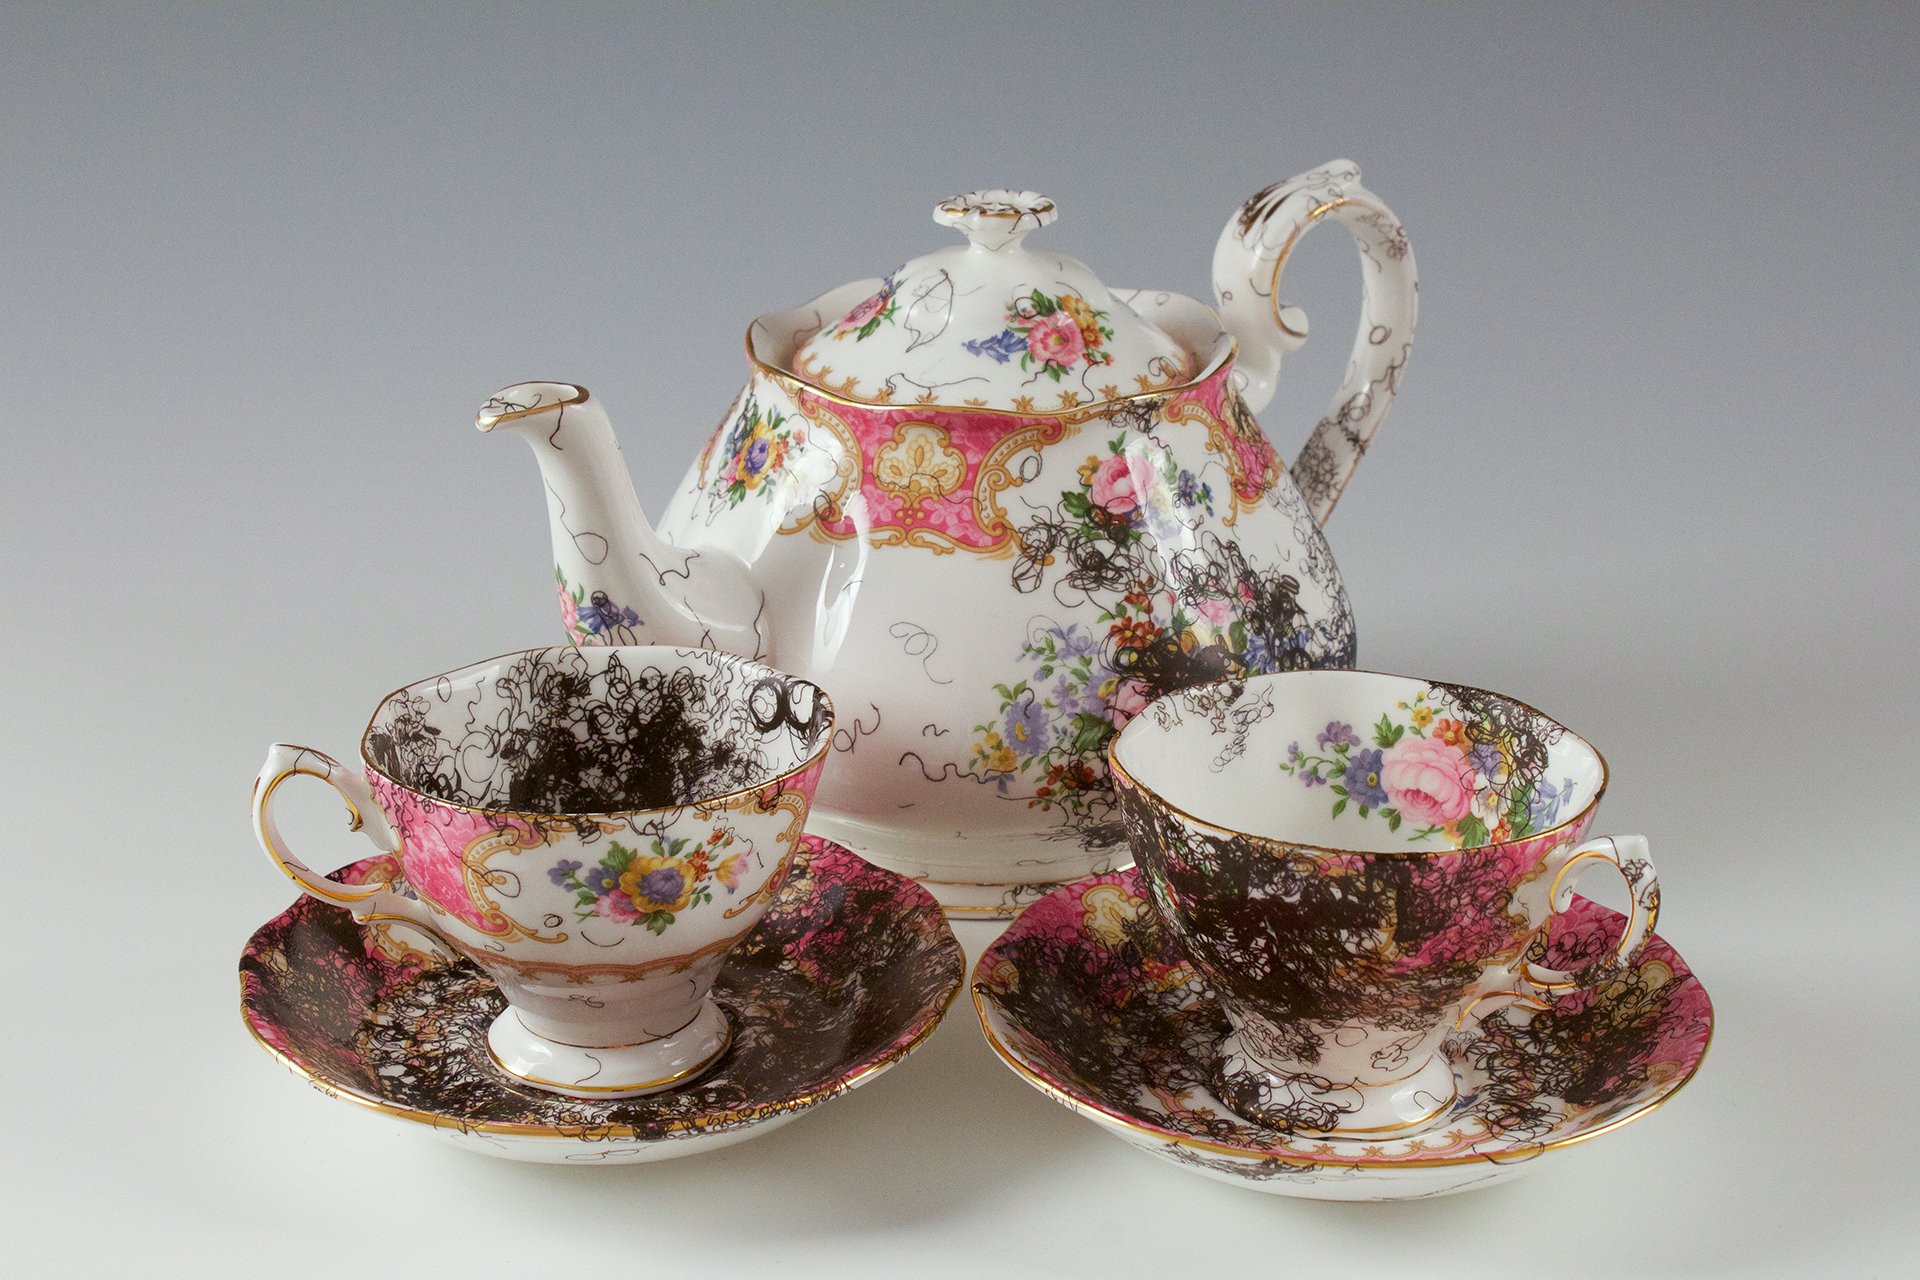 A vintage, china teapot and two cups and saucers with floral decorations is overlaid with decal drawings of curly, black hair. (Copy)